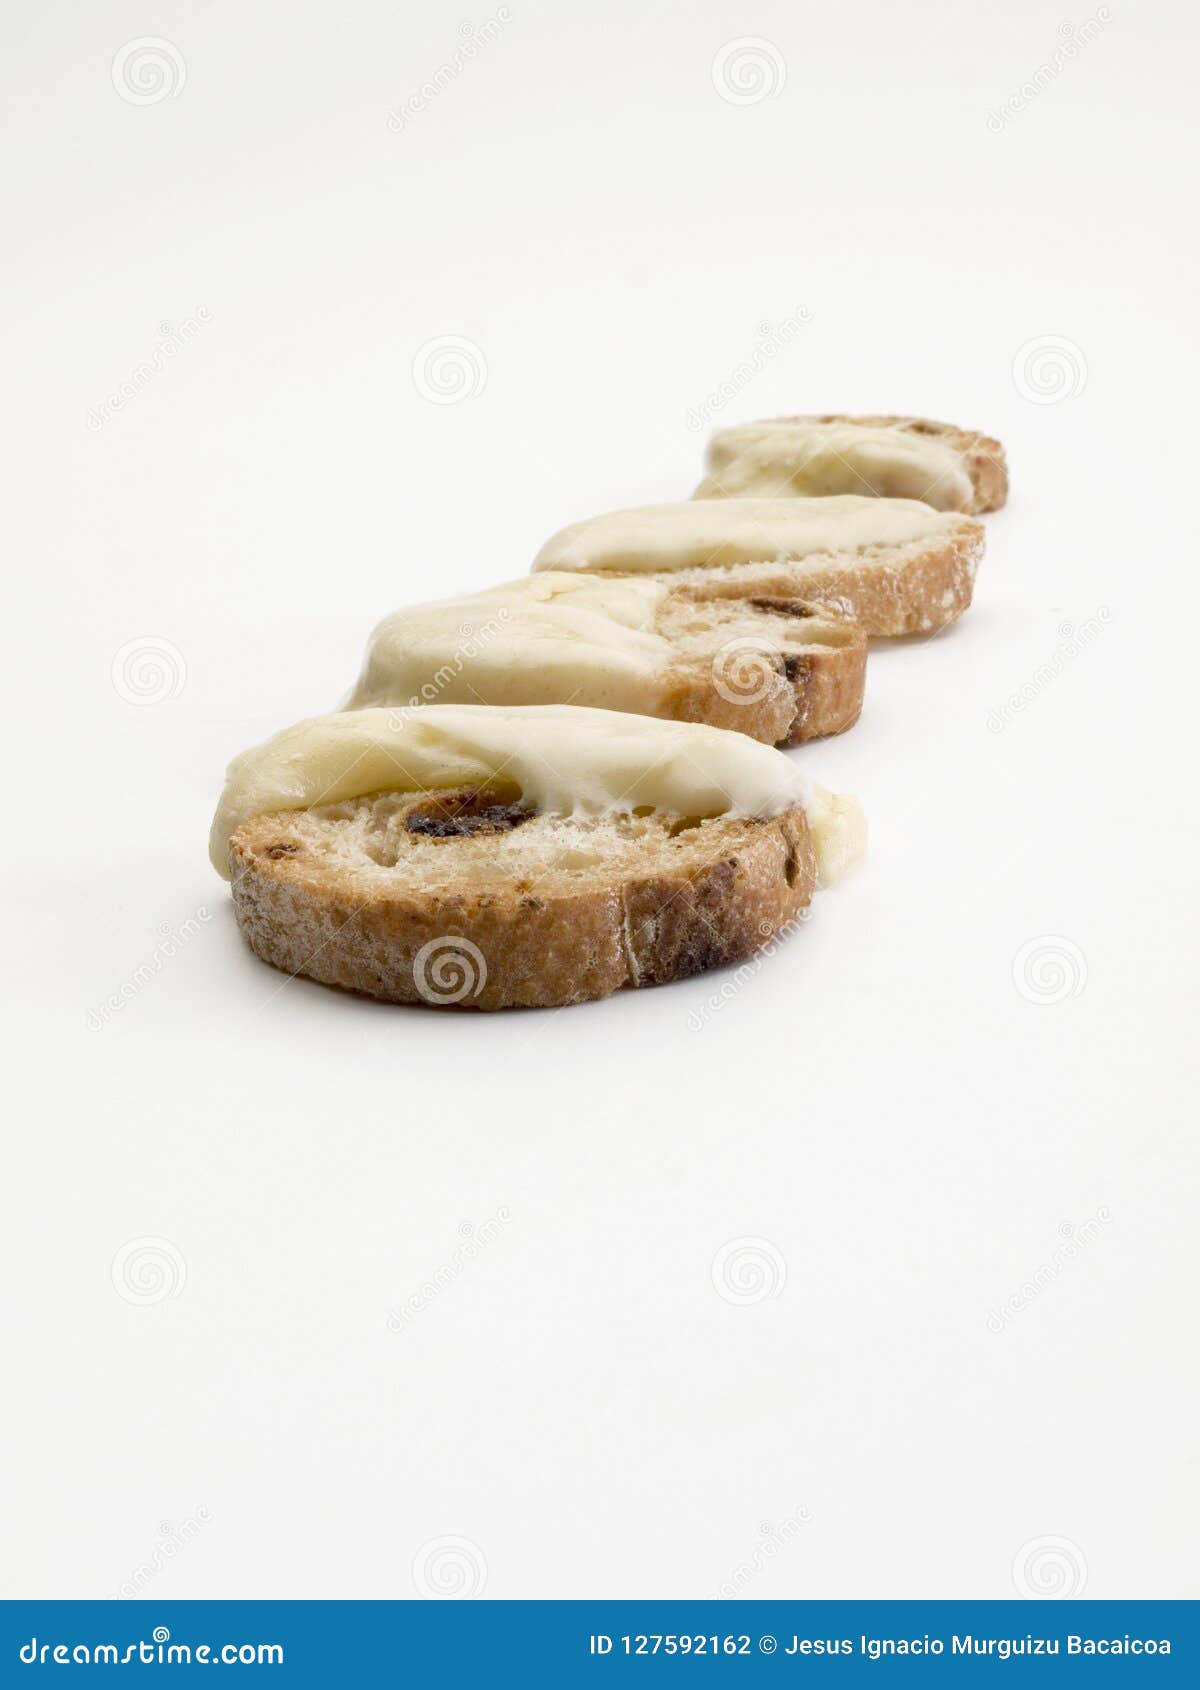 raisin bread toast with melted cheese on them